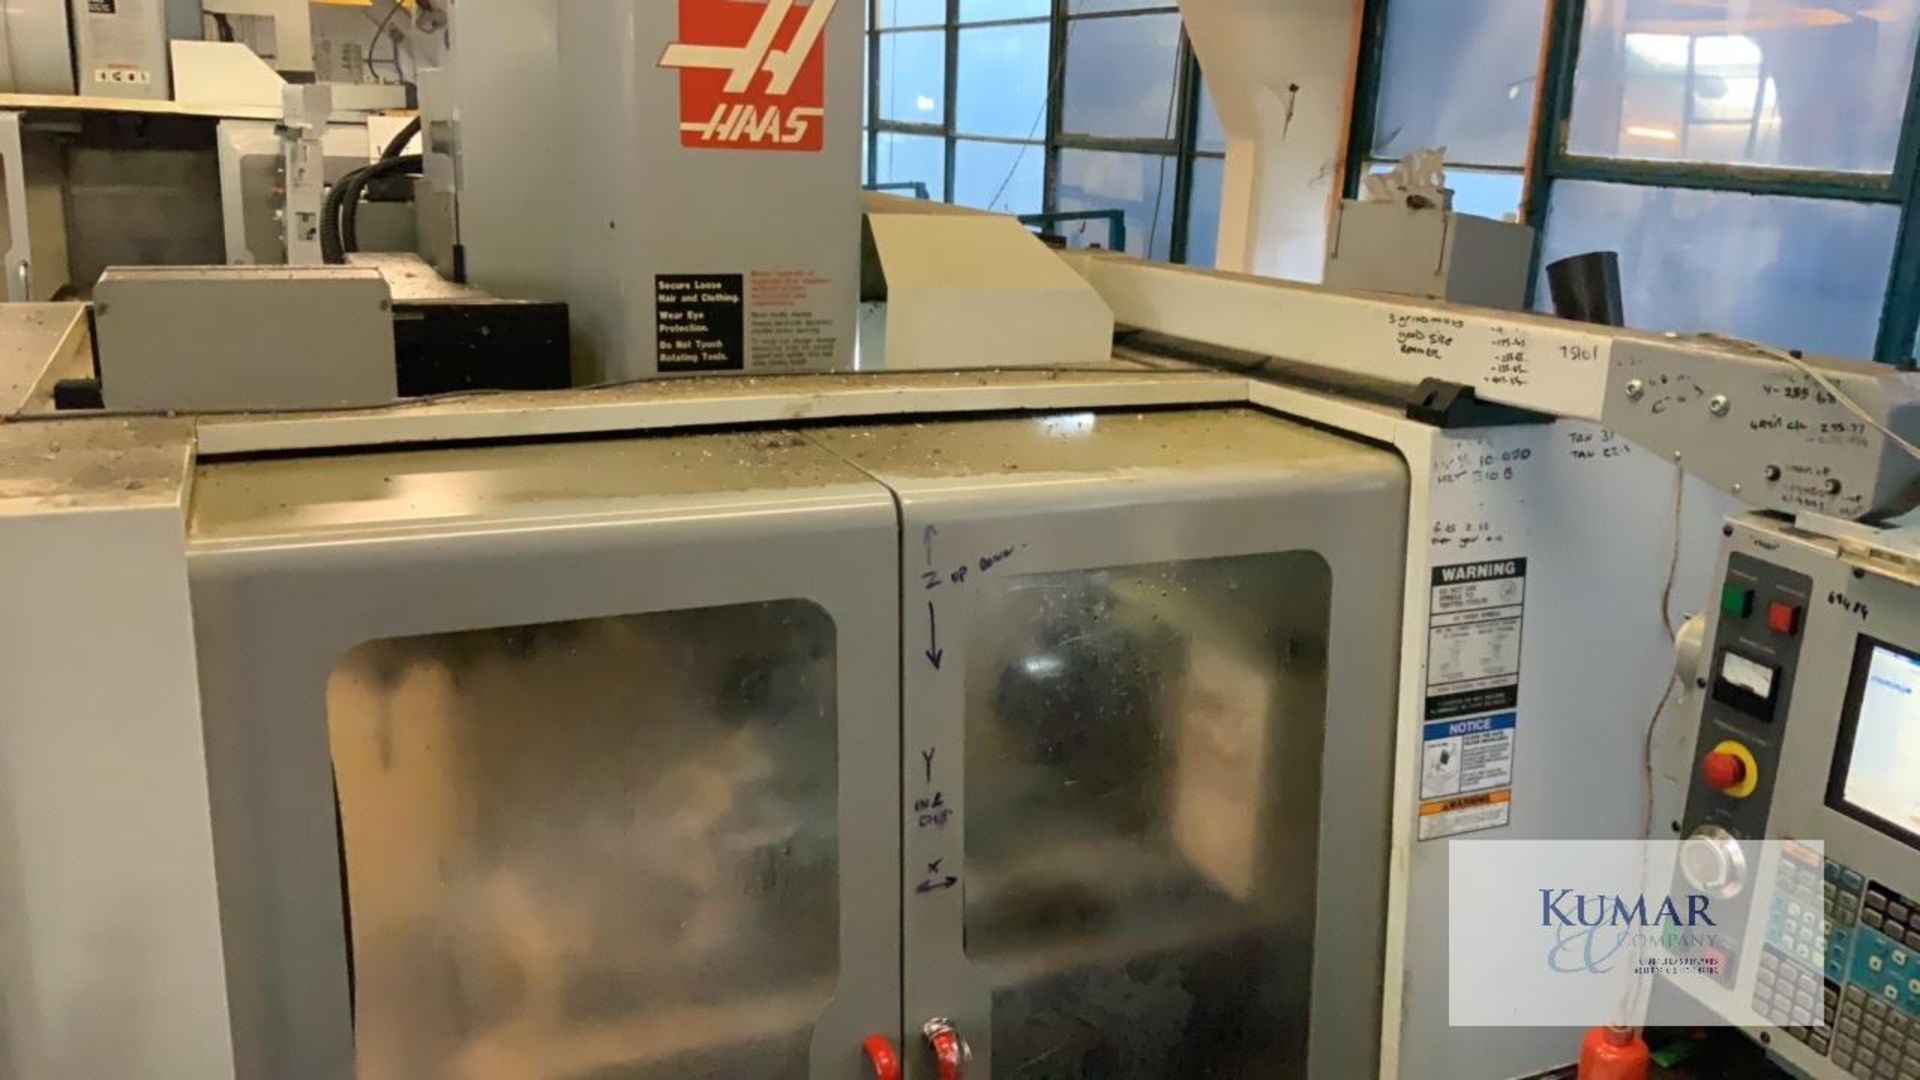 Haas Model VF 4 BHE Vertical Machining Centre, Serial No 39223 (12/04) .Machine in operation at time - Image 8 of 10